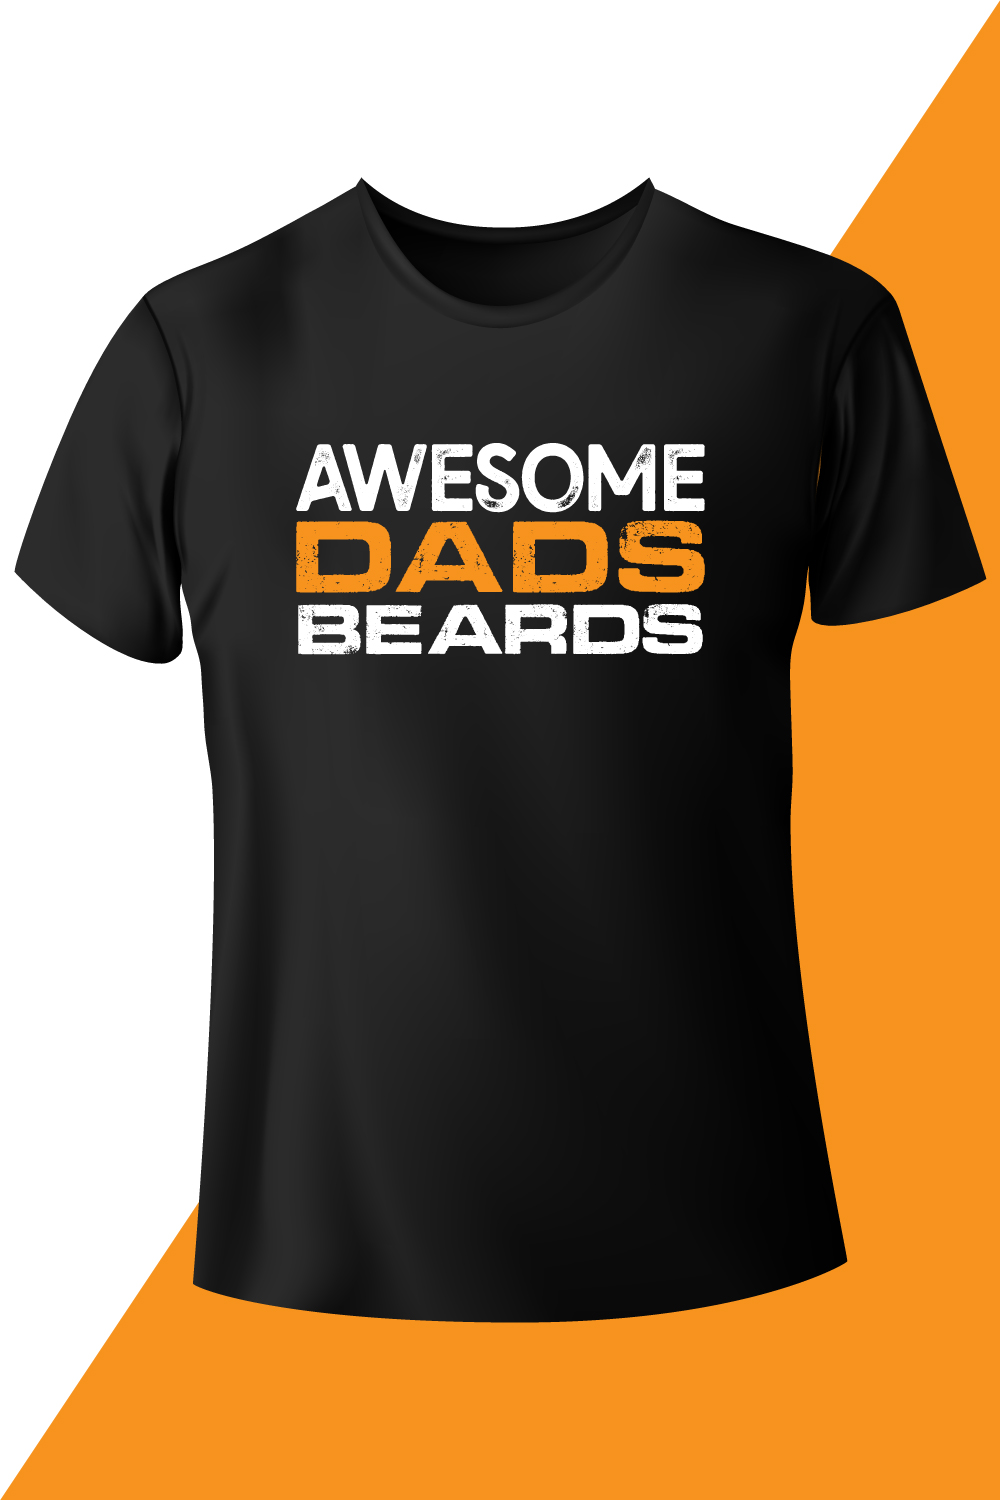 Image with a black t-shirt with a unique awesome dads beards caption.